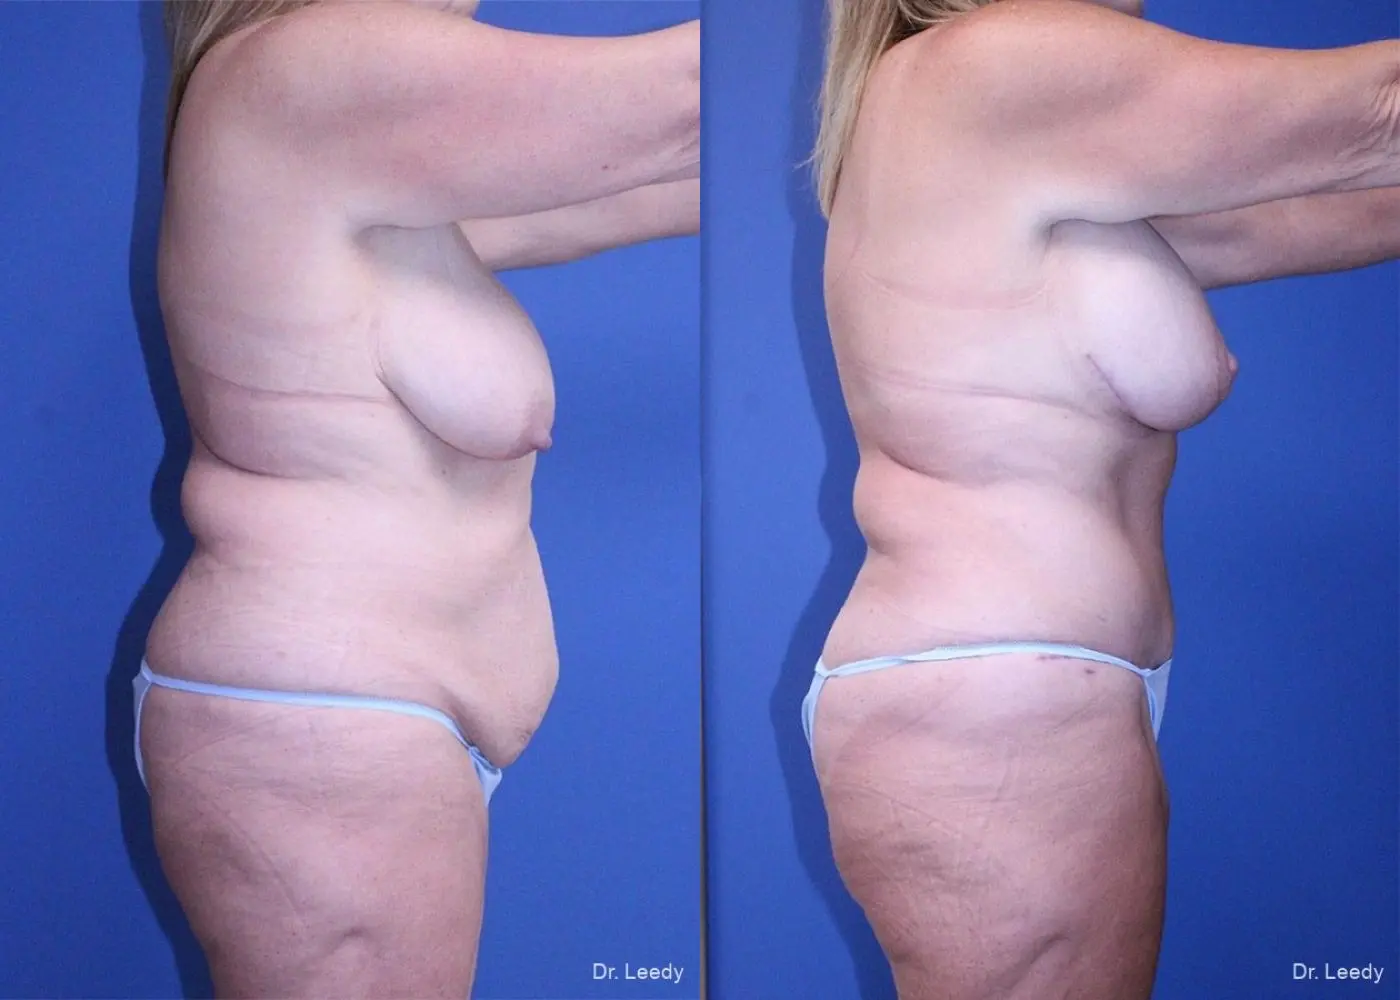 Surgery After Weight Loss: Patient 6 - Before and After 3